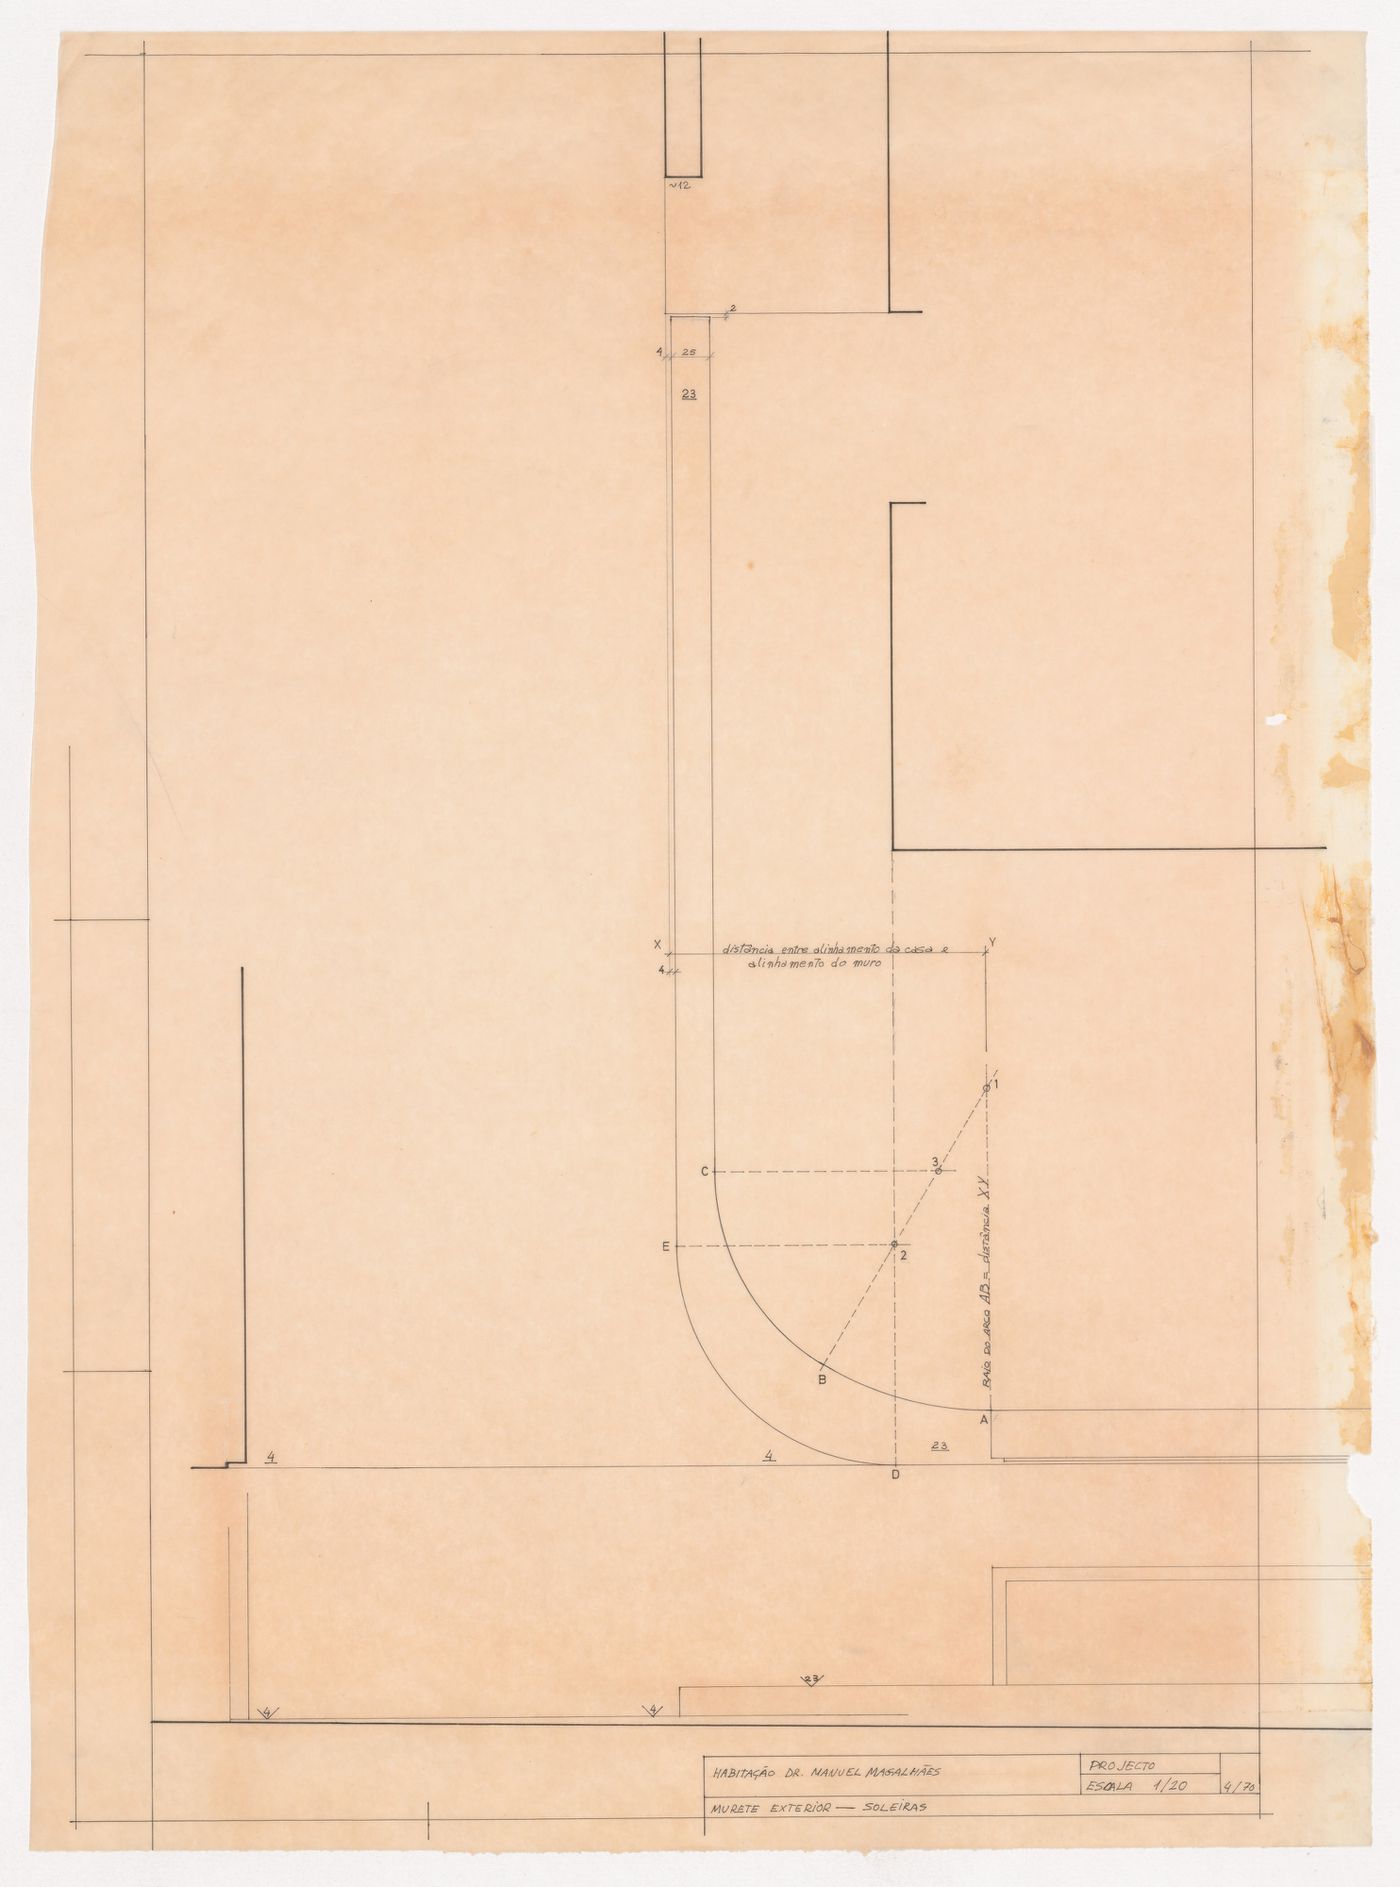 Plan for external wall for Casa Manuel Magalhães, Porto